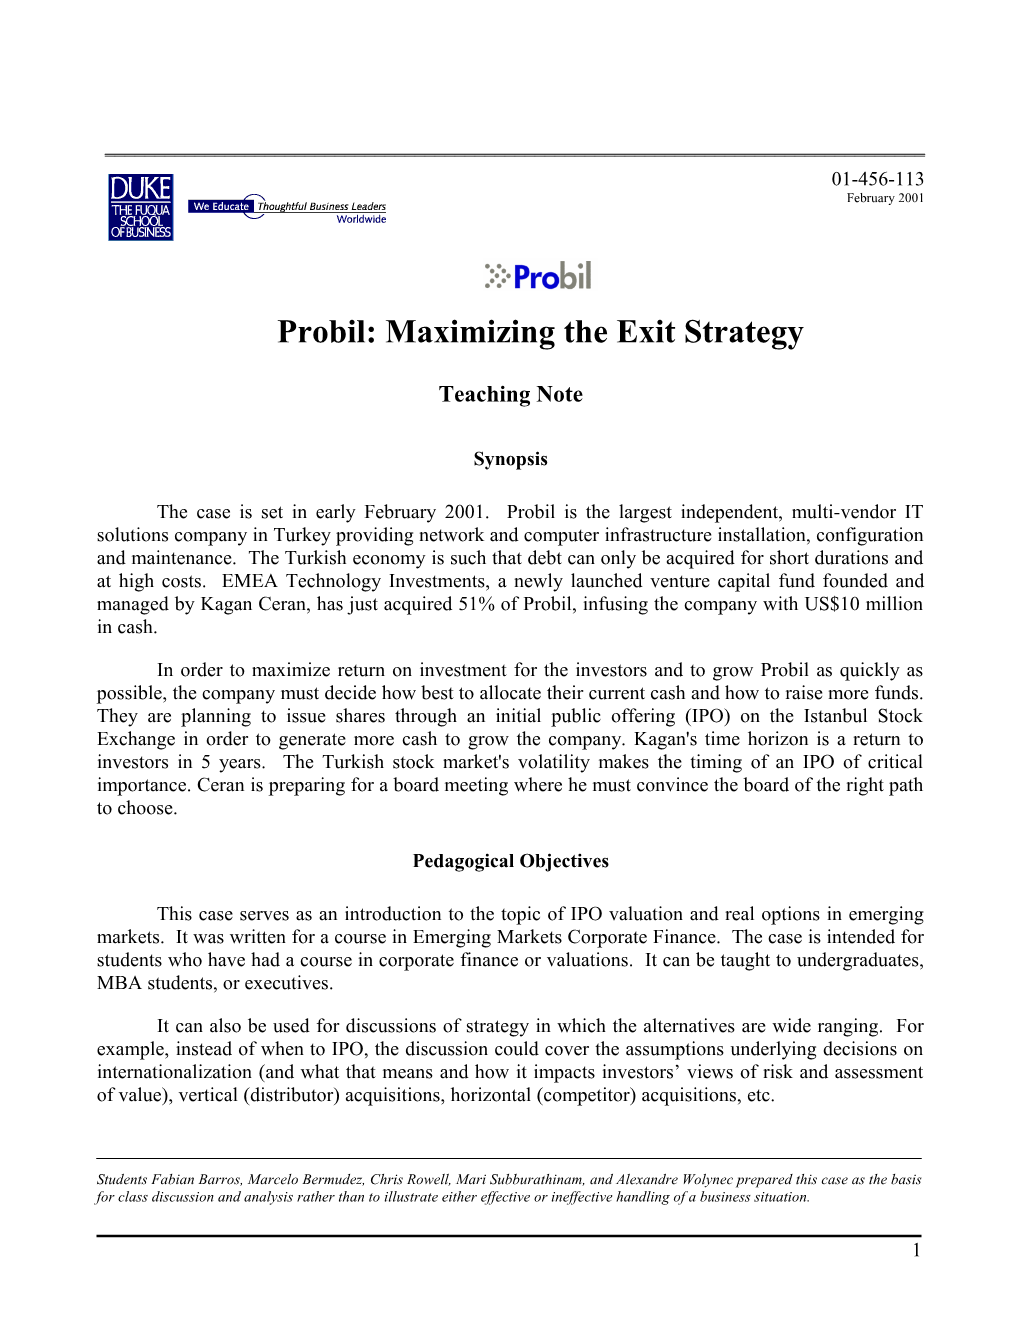 Probil: Maximizing the Exit Strategy: Solution